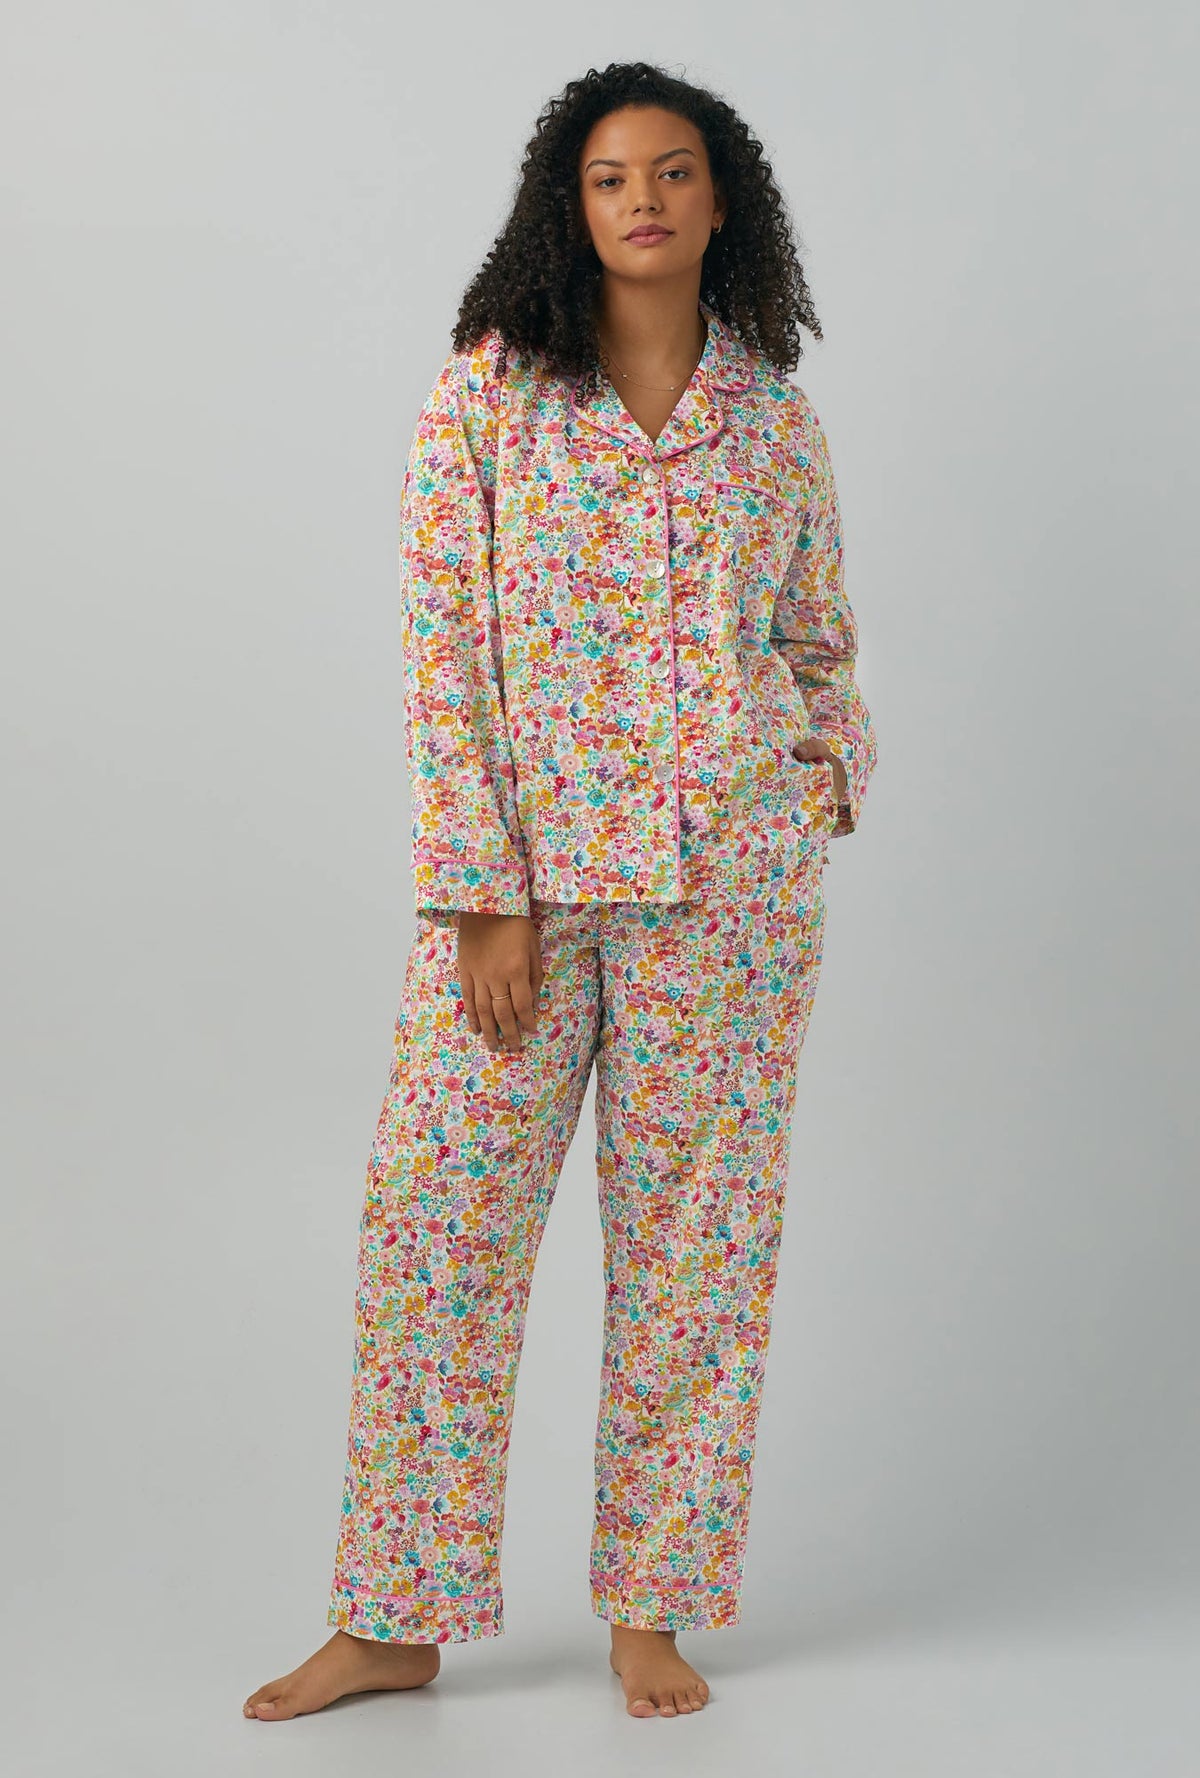 A lady wearing multi color plus size Long Sleeve Classic Woven Cotton PJ Set with Classic Meadow print